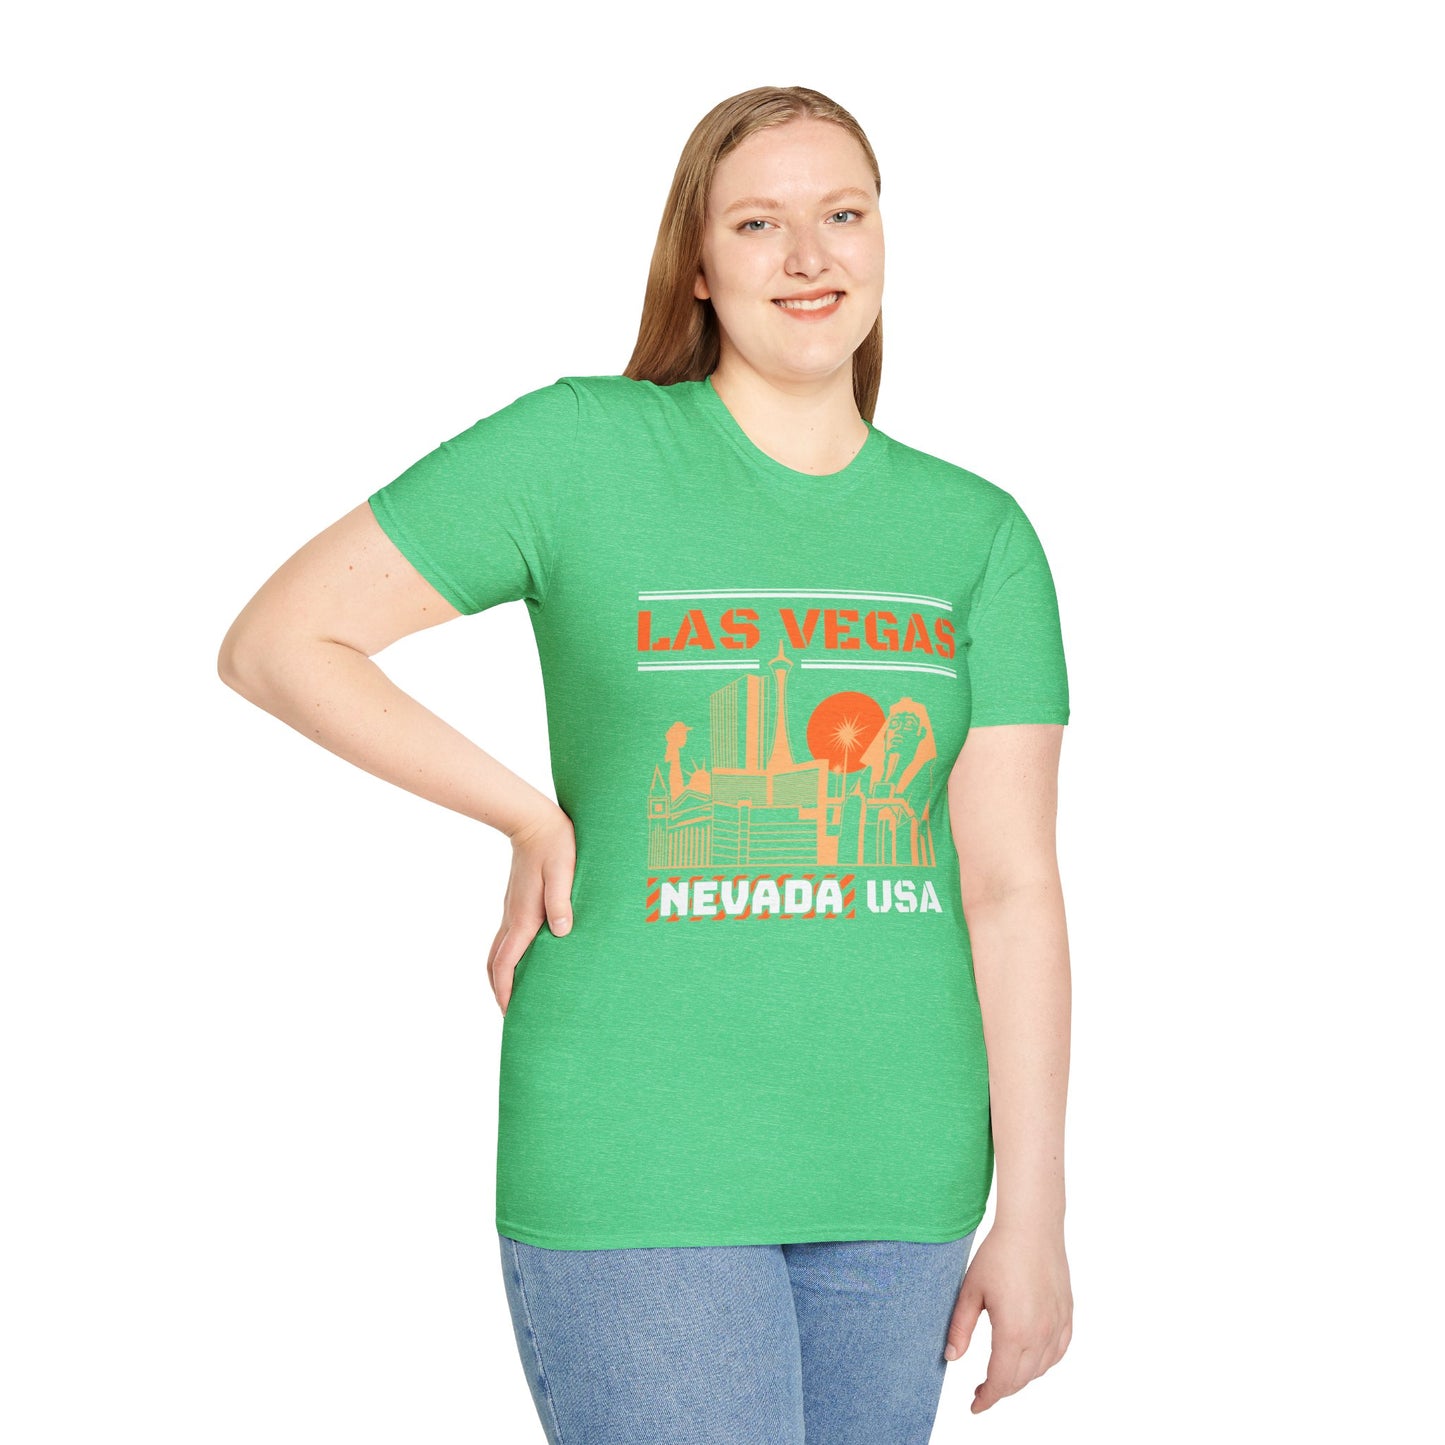 Discover the Vibrant Vibes of Las Vegas, Nevada with Our Stylish T-Shirt